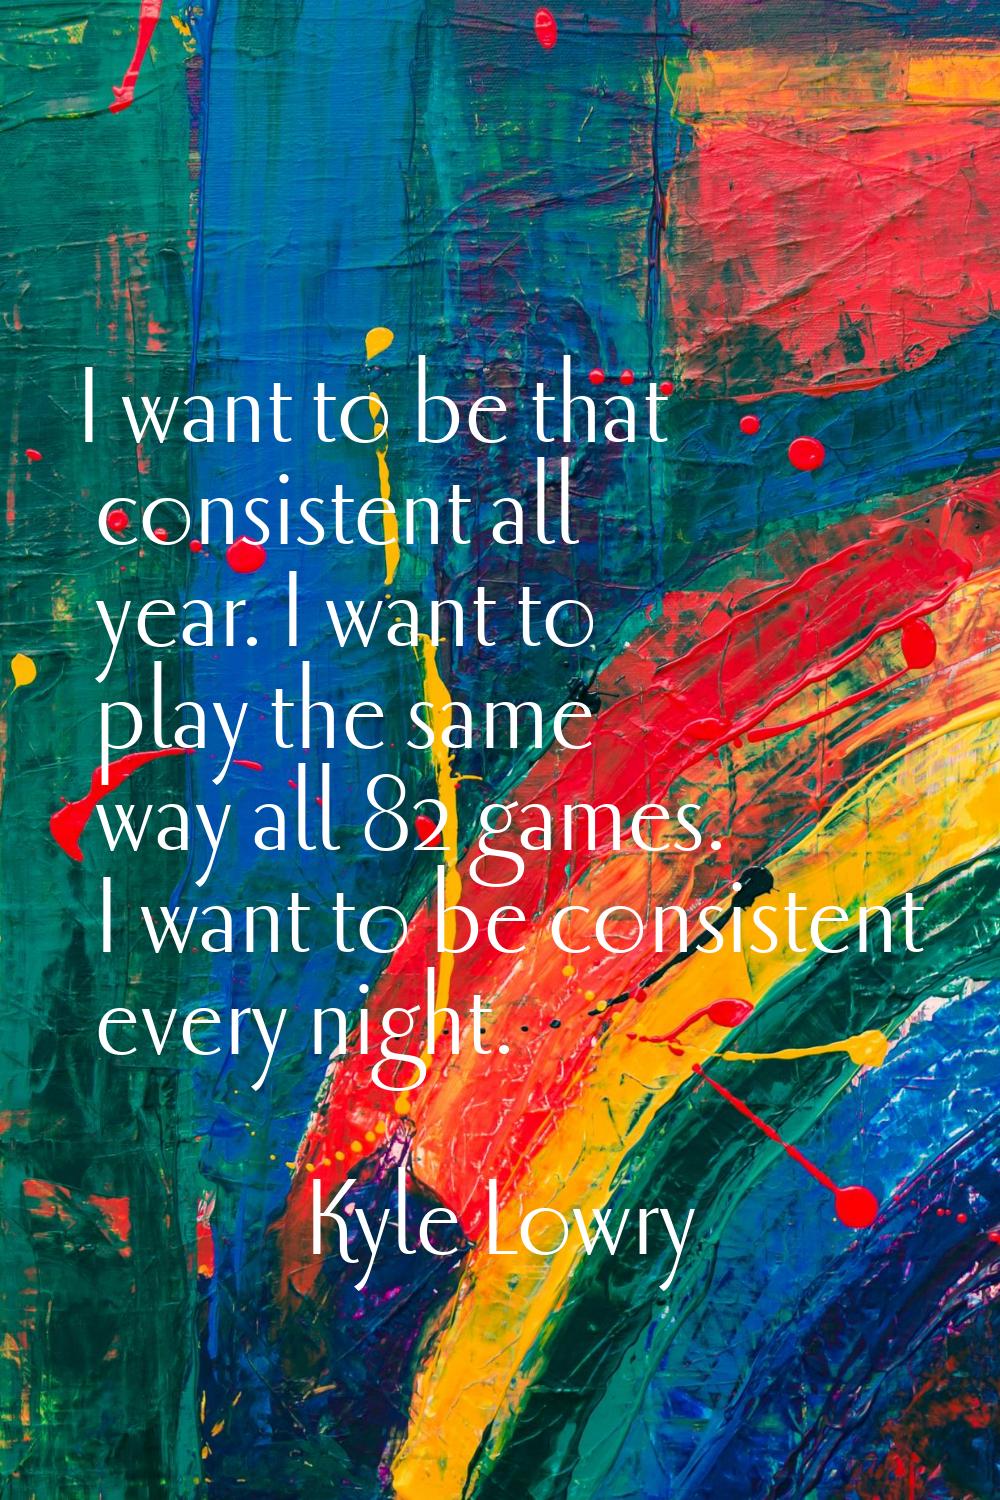 I want to be that consistent all year. I want to play the same way all 82 games. I want to be consi